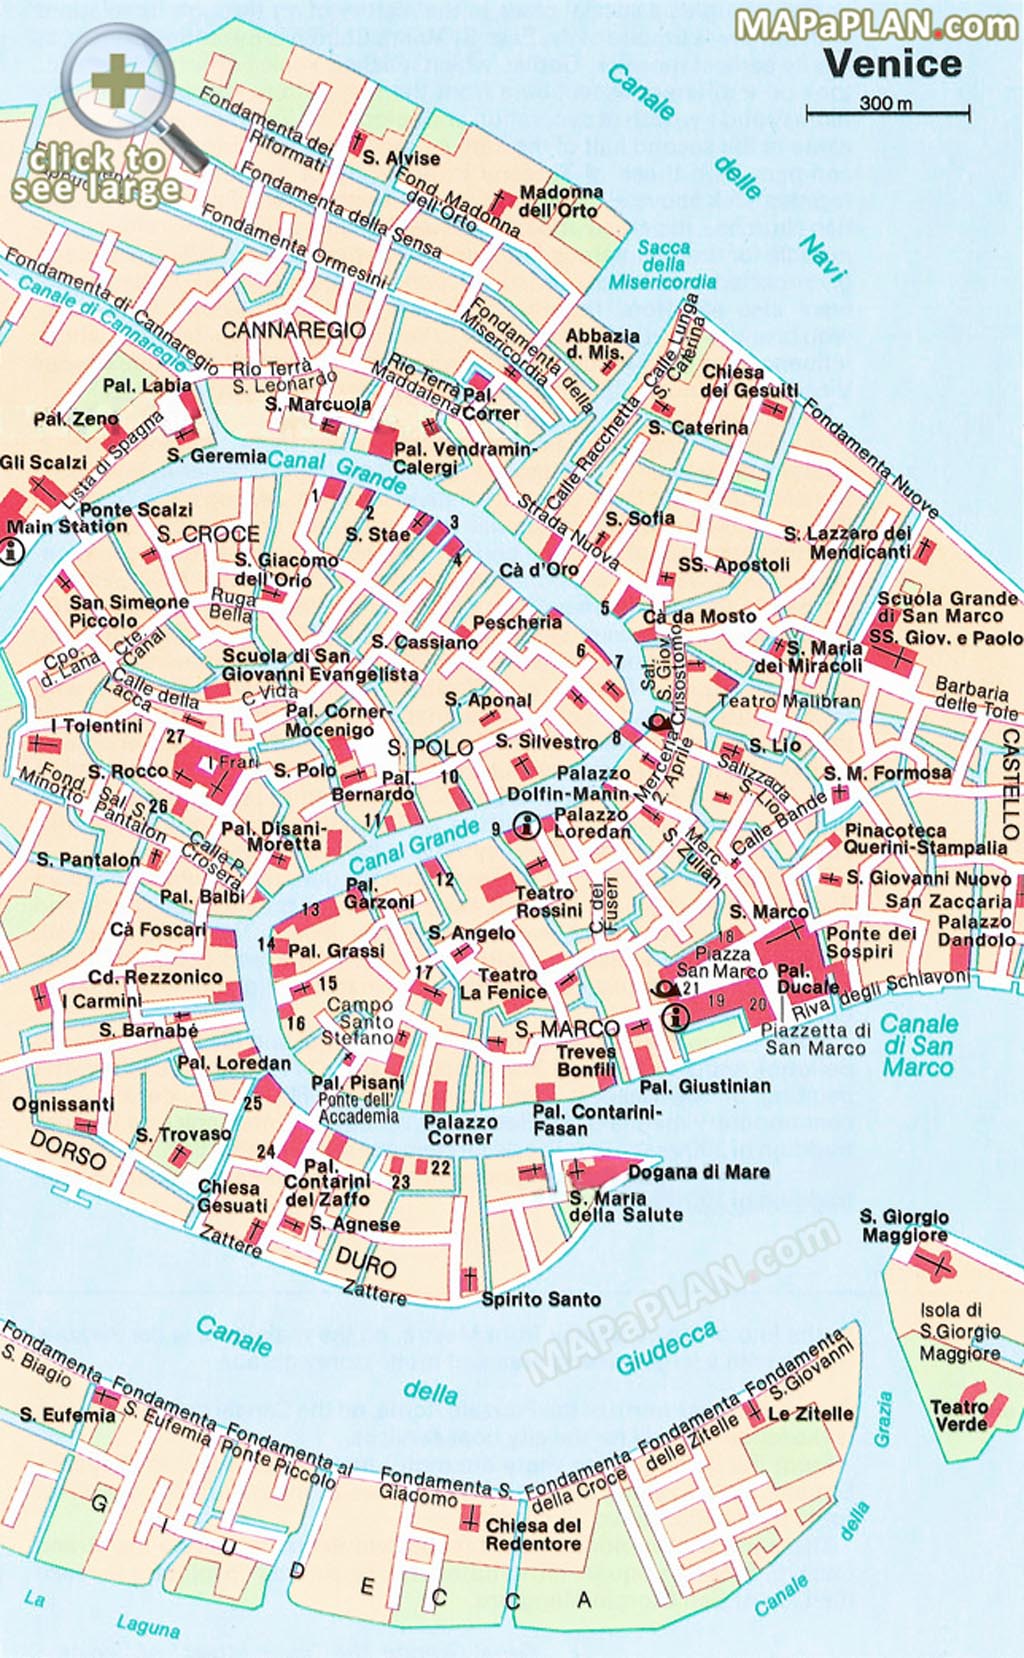 Central Venice most popular historical sights Venice top tourist attractions map